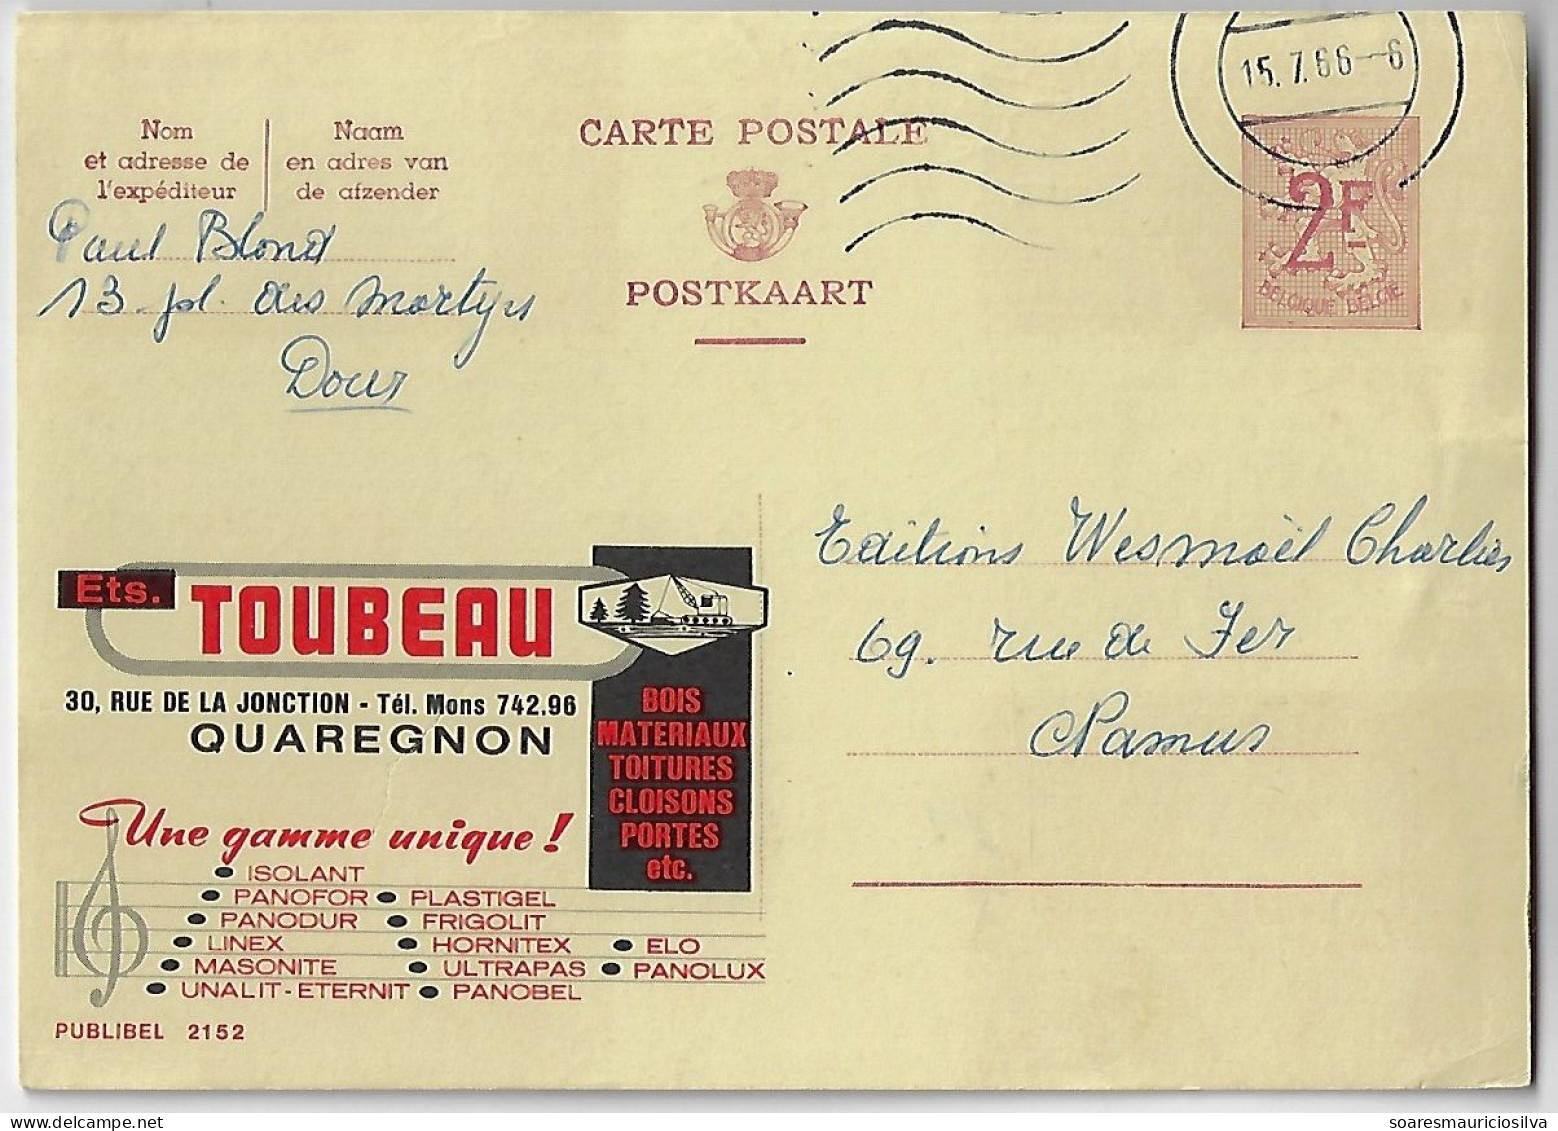 Belgium 1966 Postal Stationery Card Publibel No. 2152 Wood Industry Toubeau From Dour To Namur Tractor Tree Sheet Music - Other (Earth)